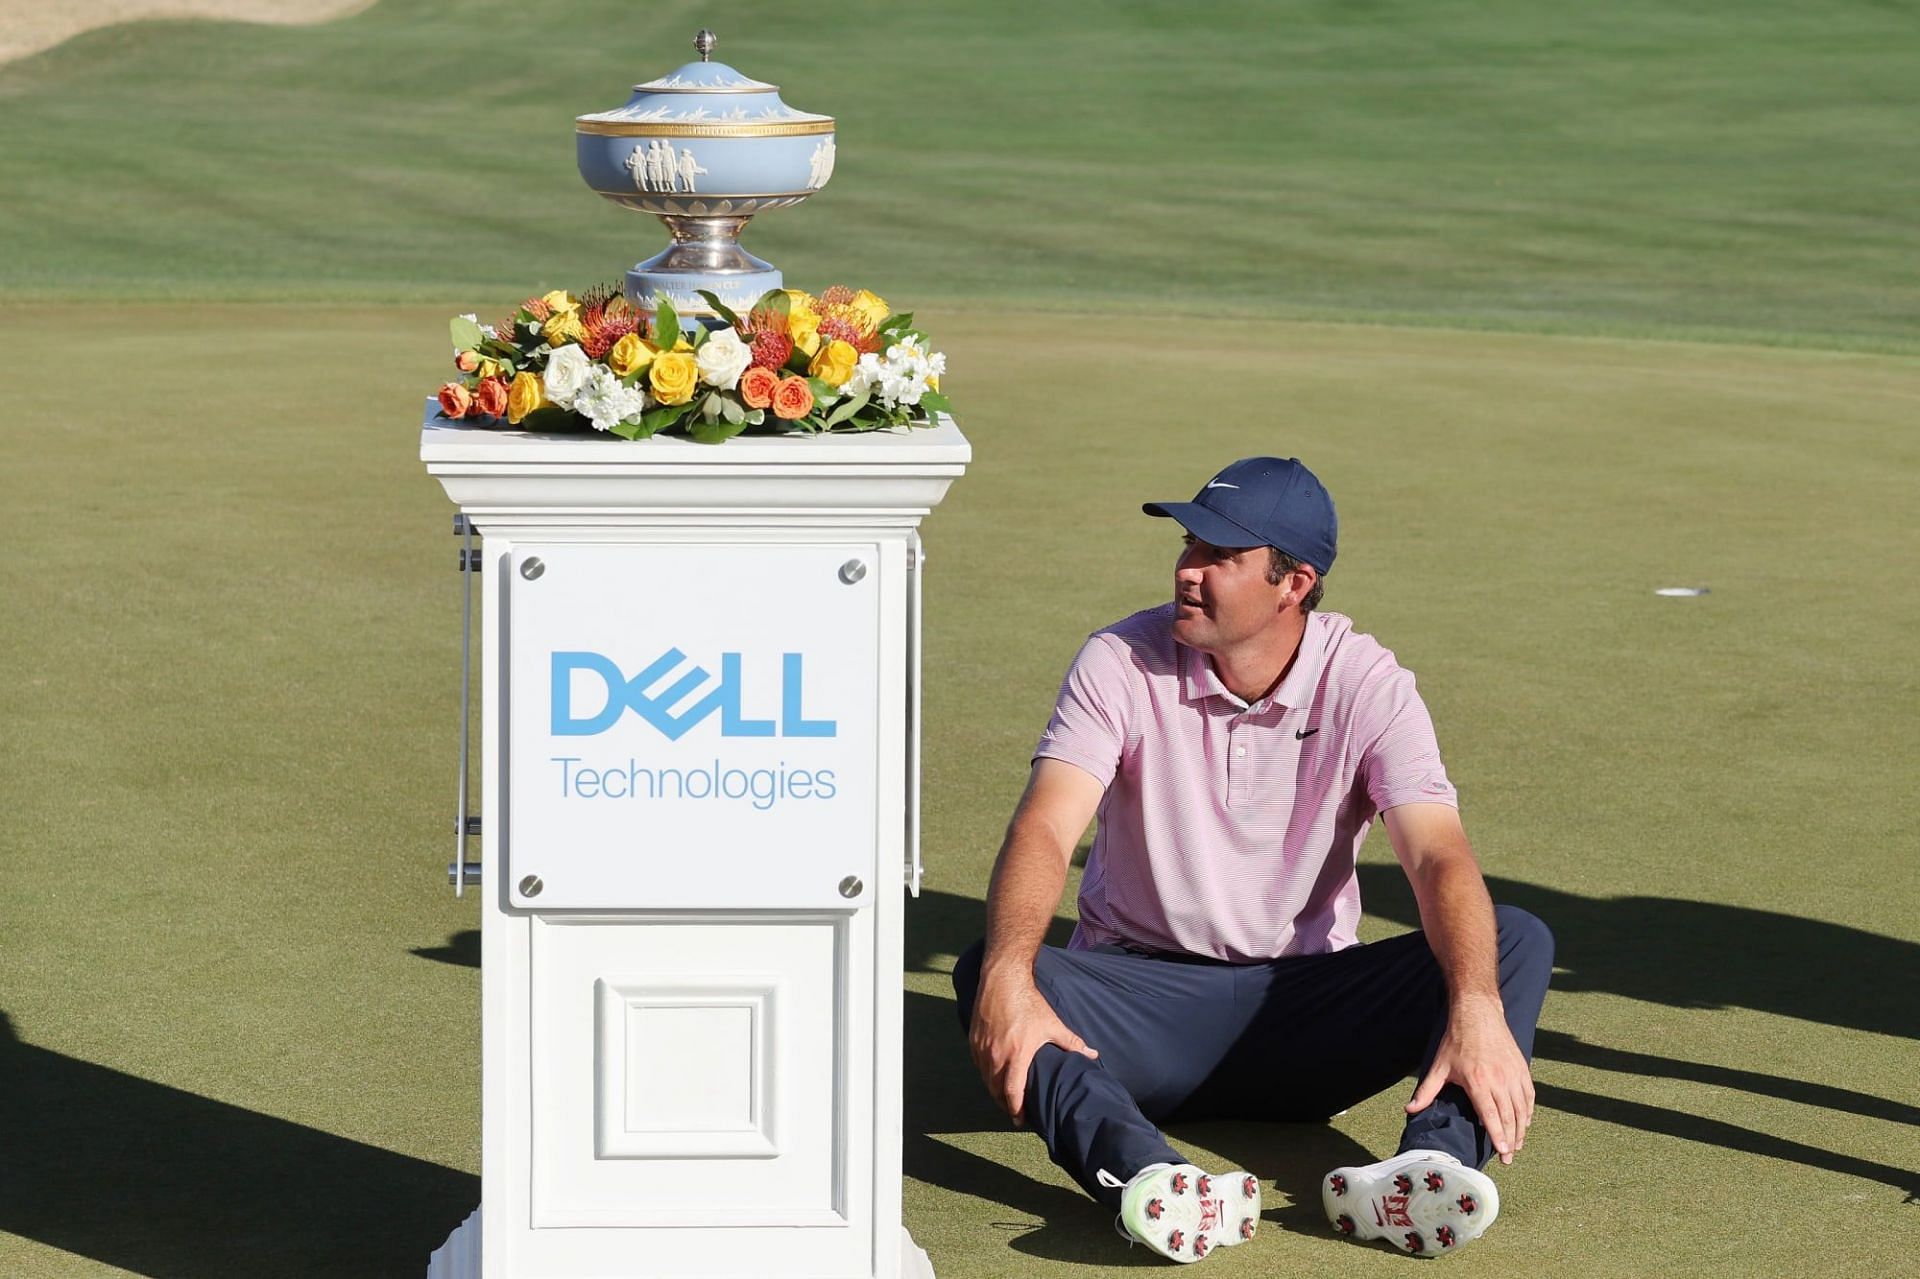 dell match play tv coverage